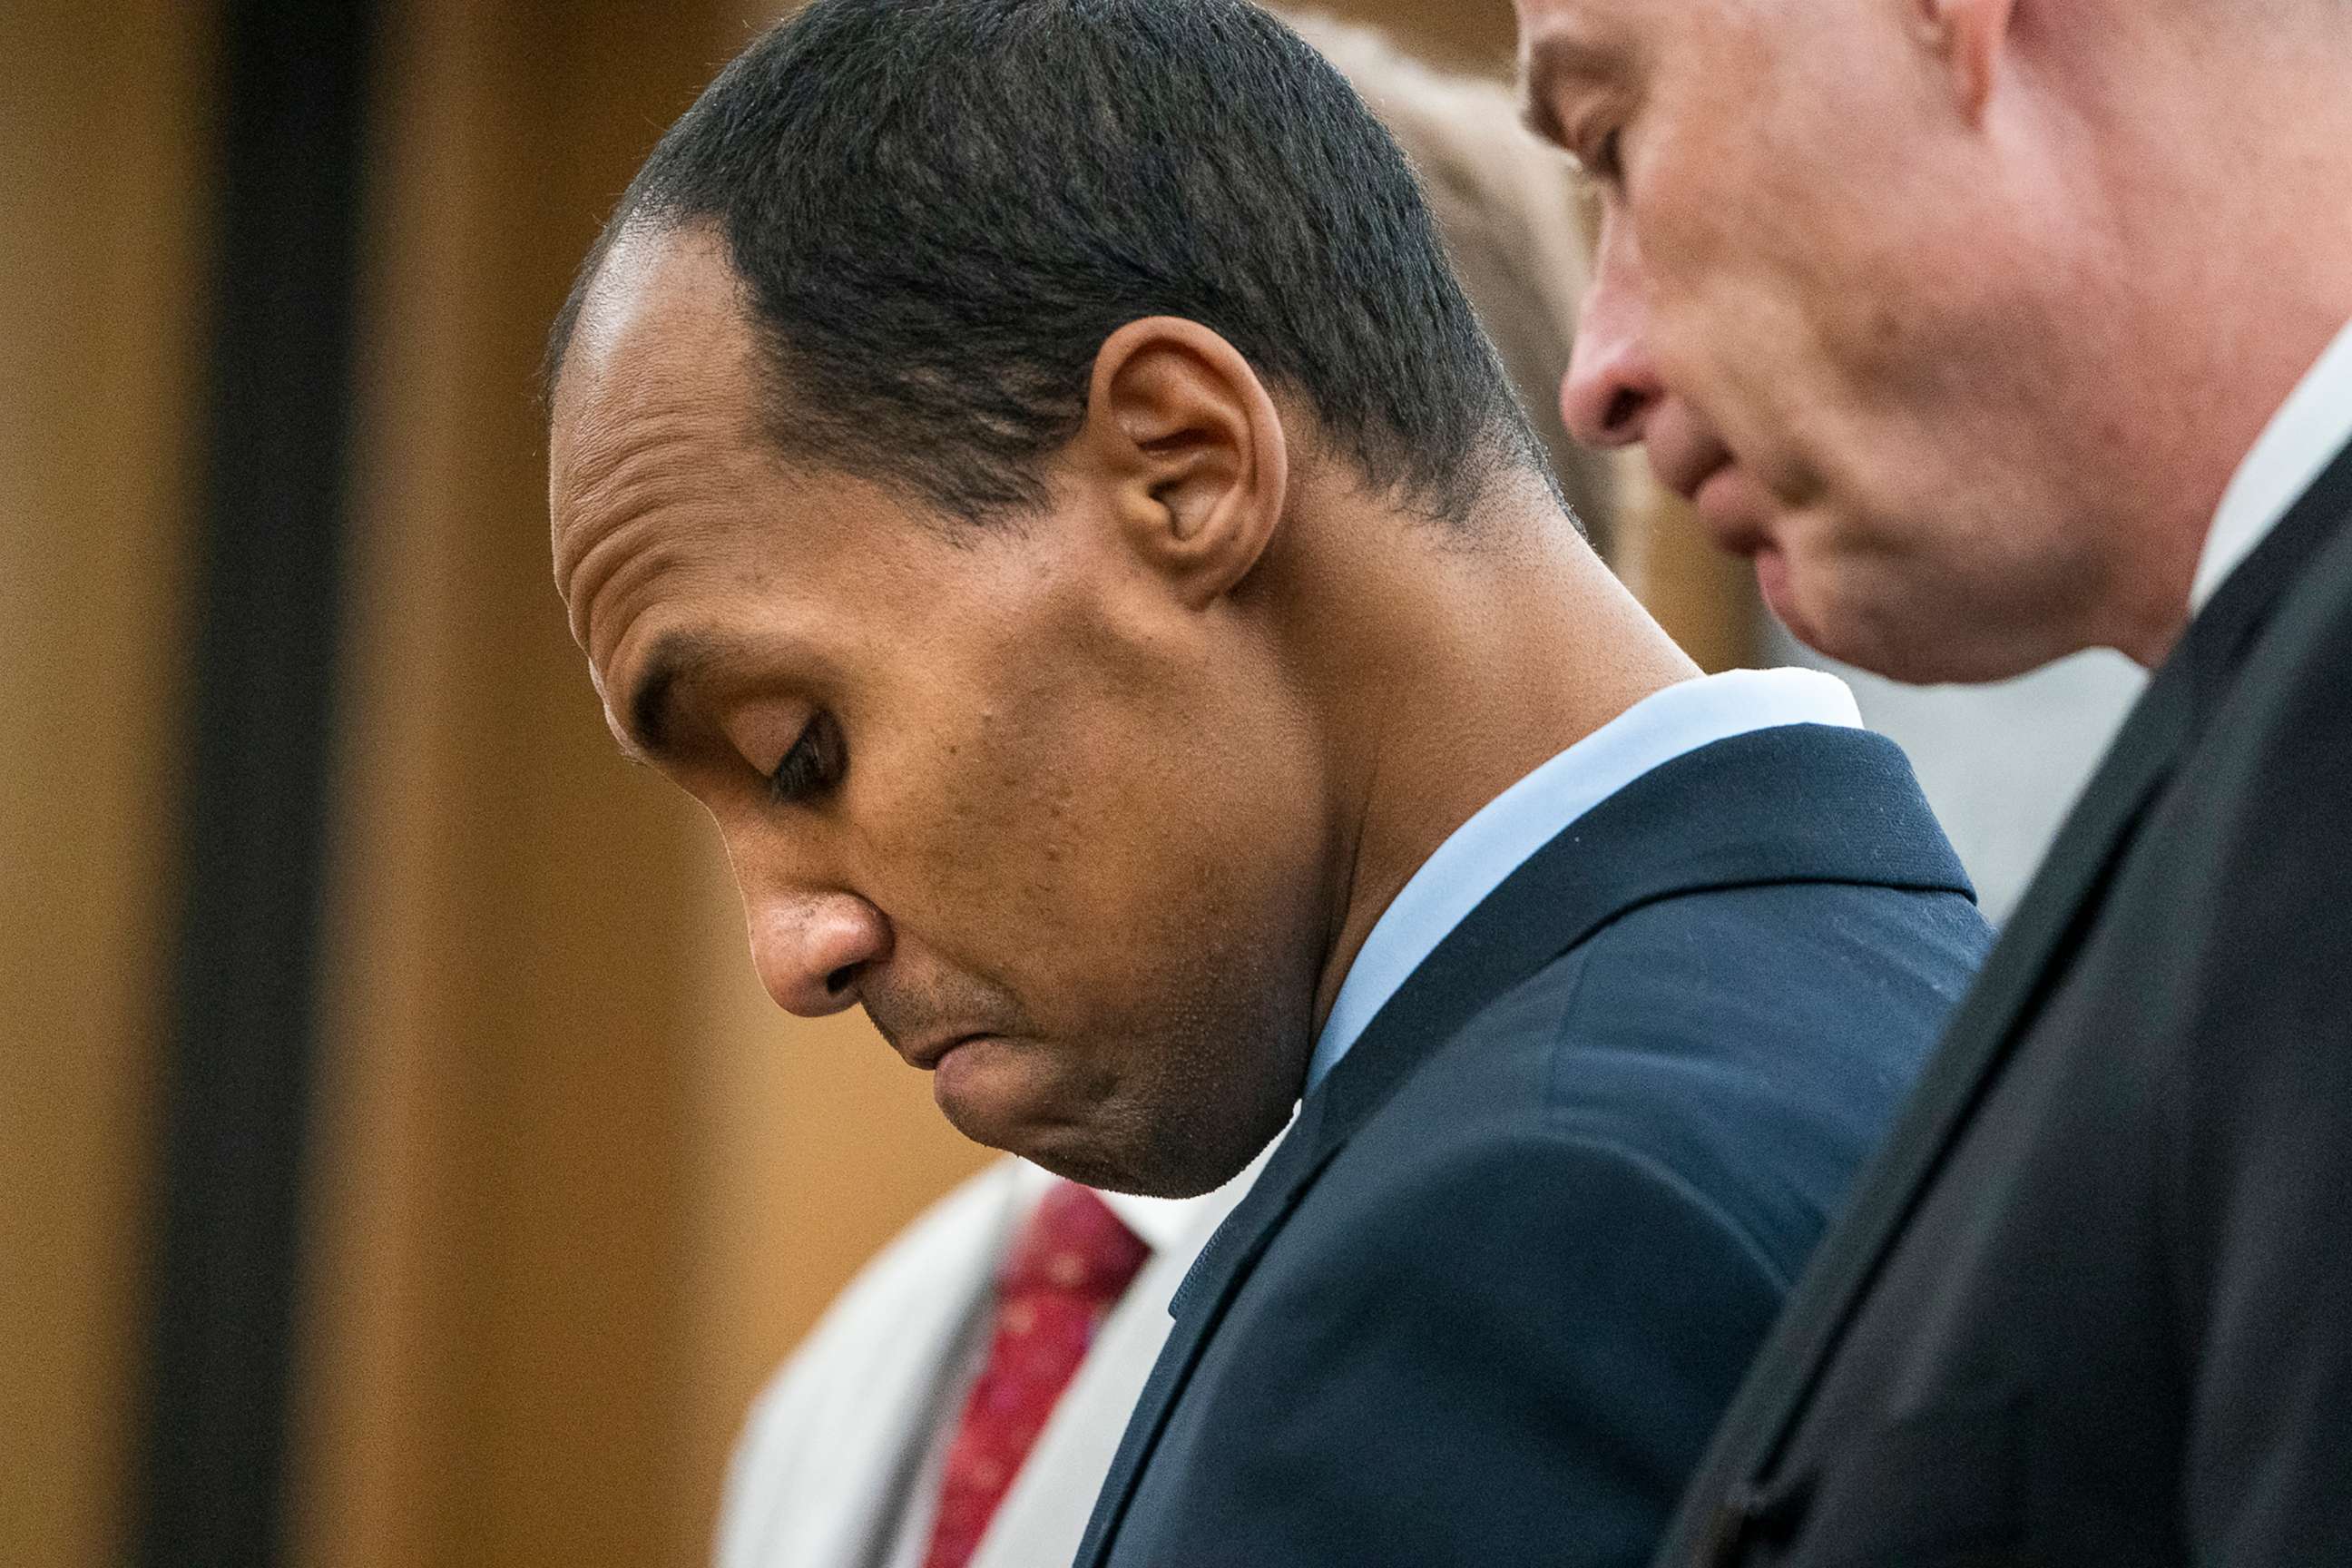 PHOTO: Former Minneapolis police officer Mohamed Noor reads a statement Friday, June 7, 2019, in Minneapolis, before being sentenced by Judge Kathryn Quaintance in the fatal shooting of Justine Ruszczyk Damond.